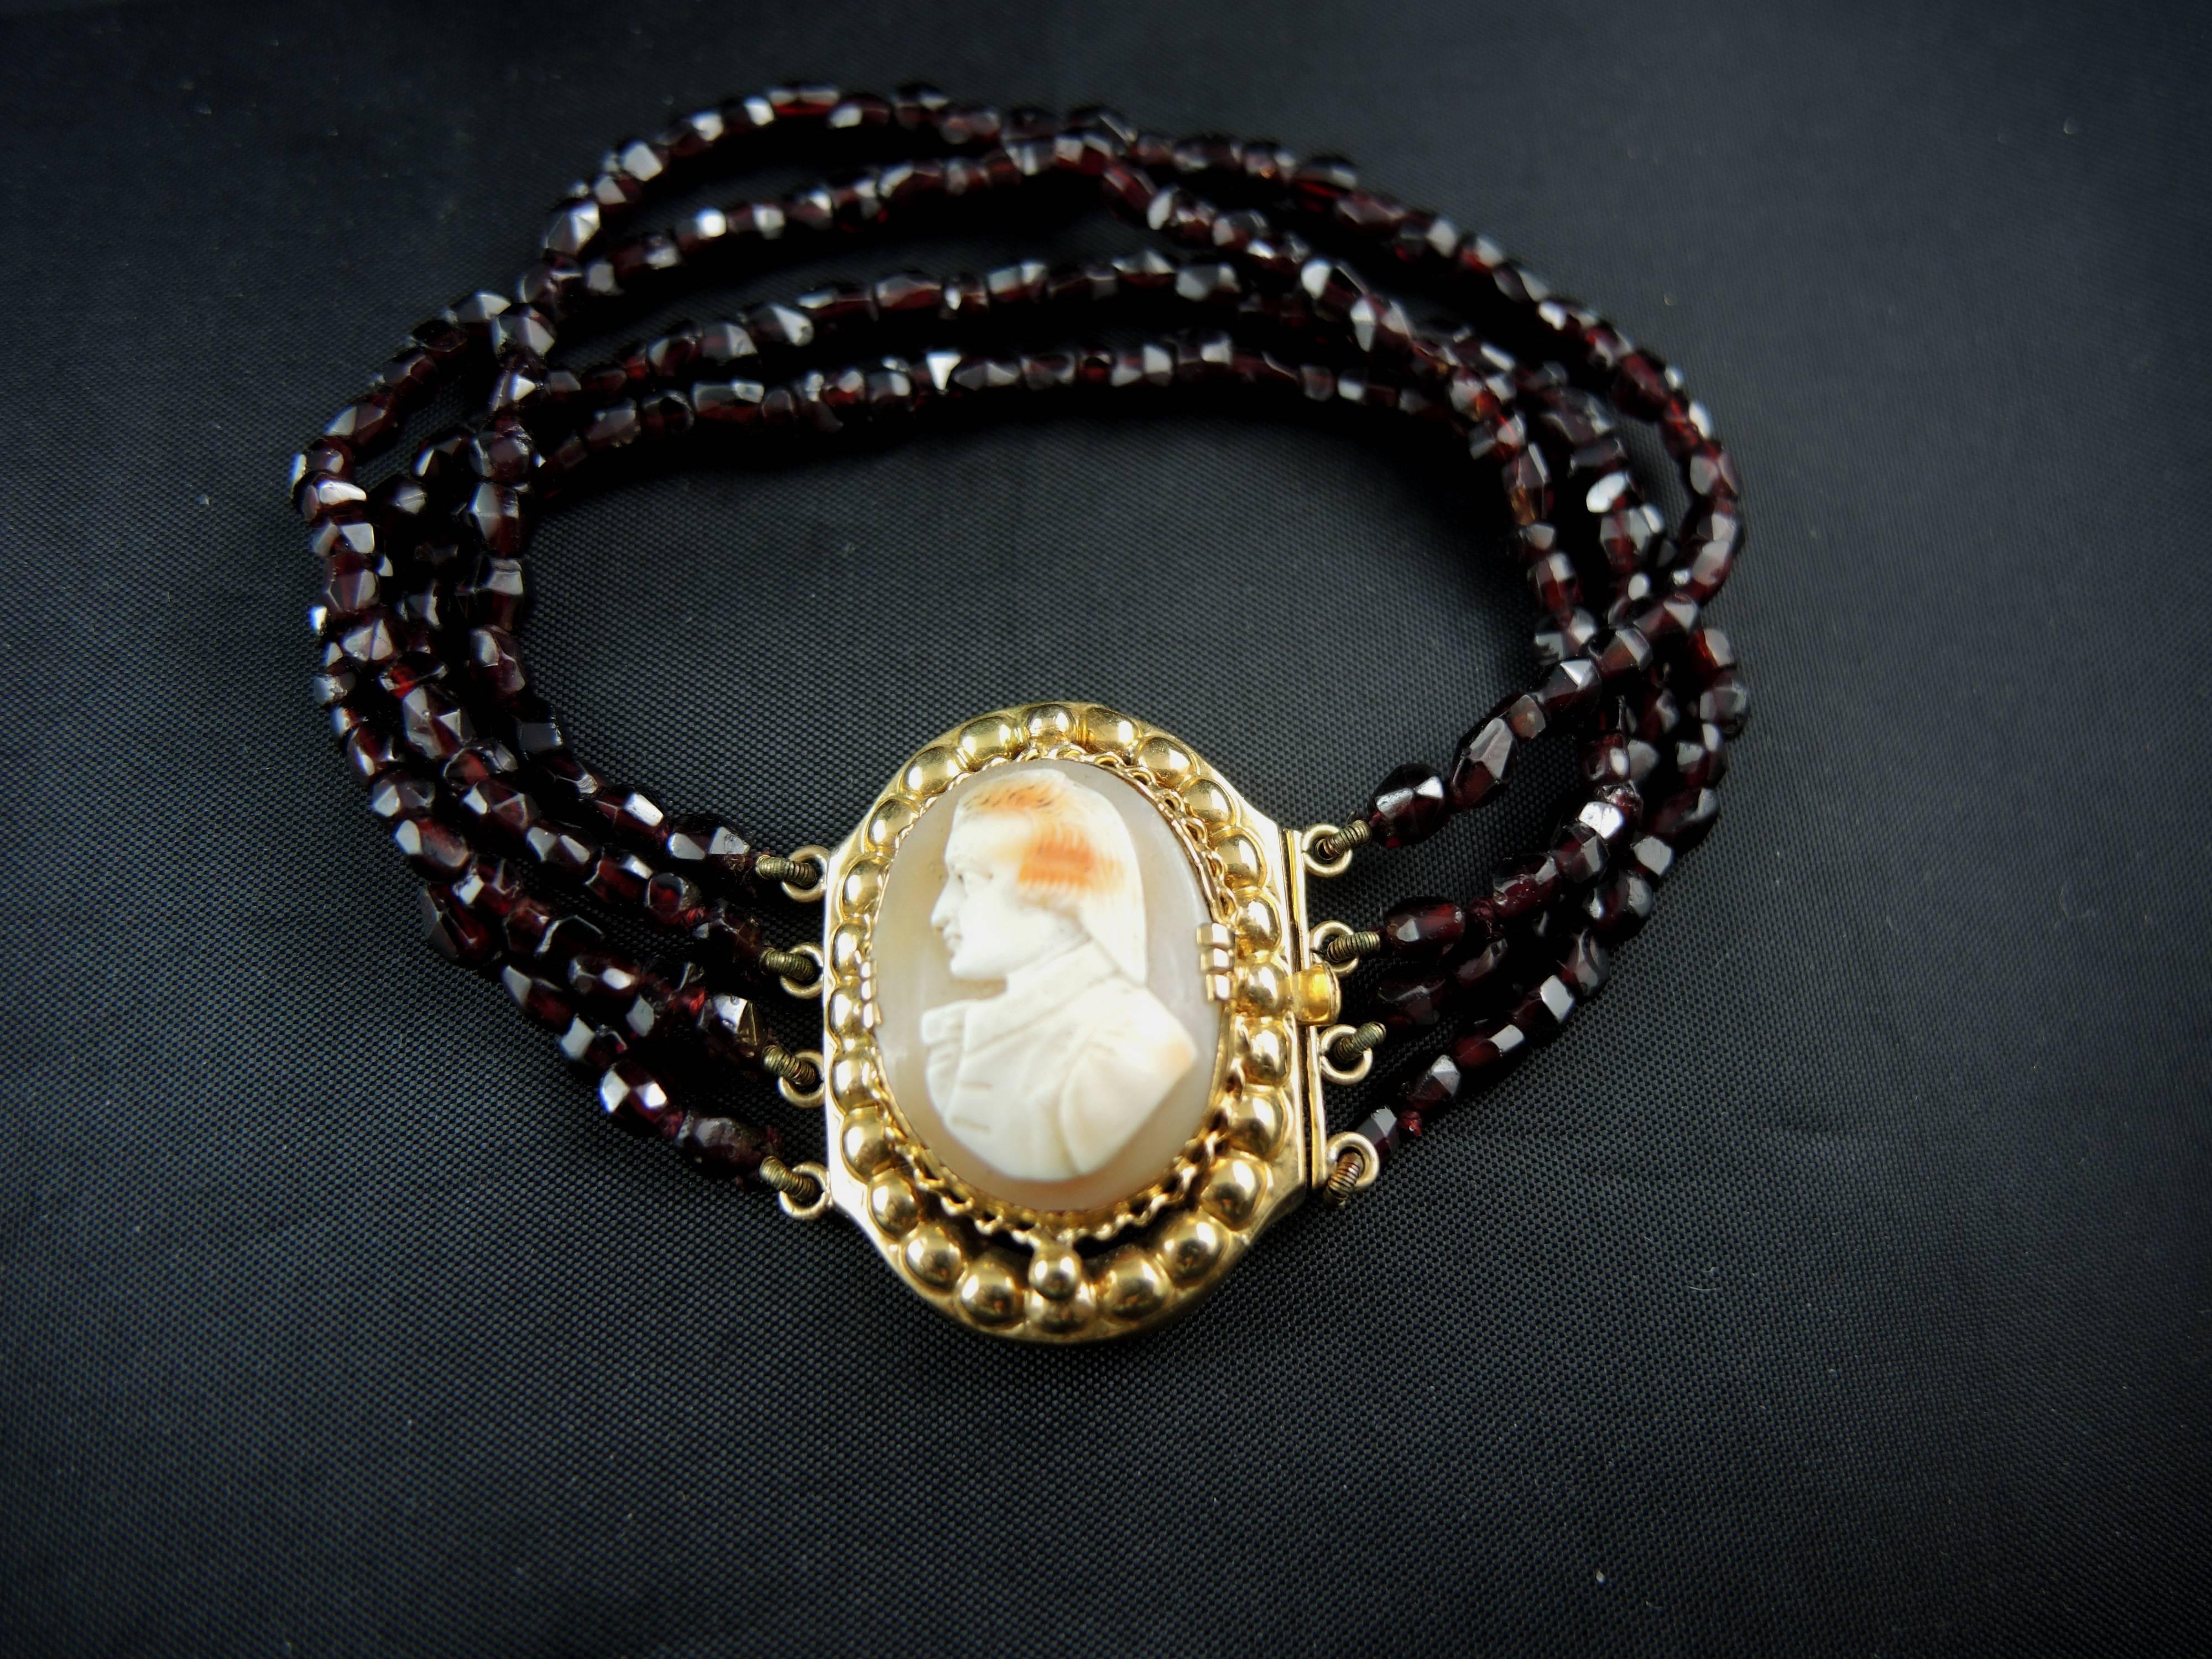 Napoleon III Antique French Gold Bracelet with Shell Cameo and Garnet Strands, 19th Century For Sale